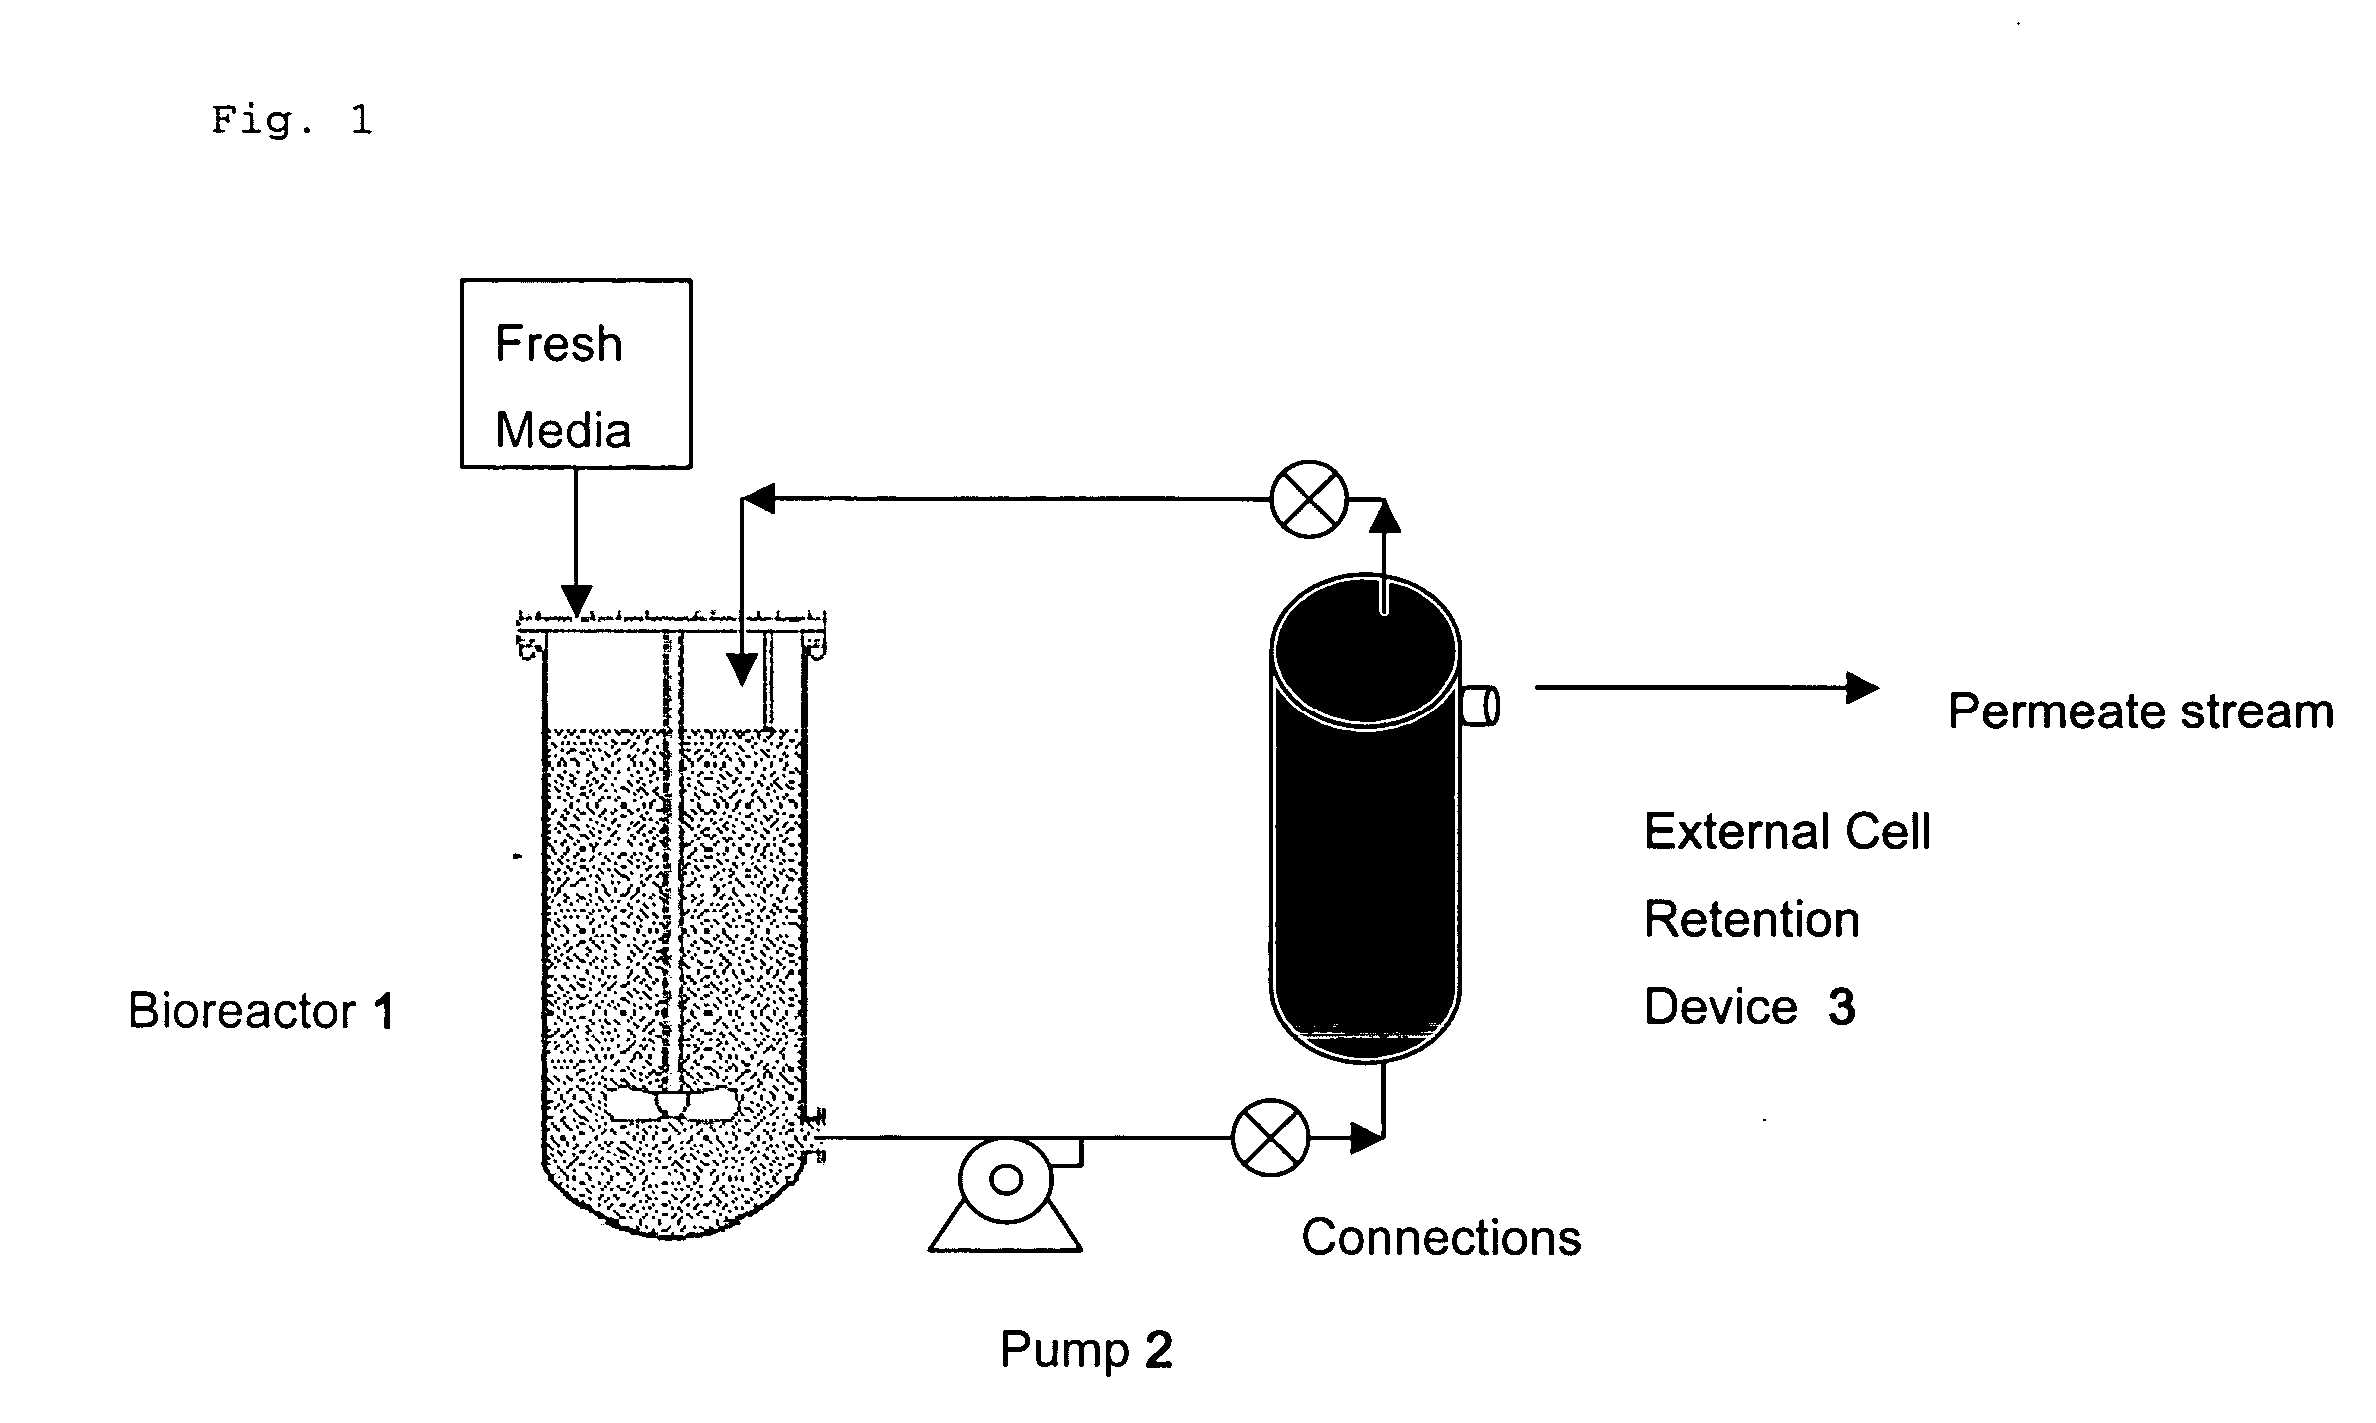 Method for maintaining low shear in a bioprocessing system